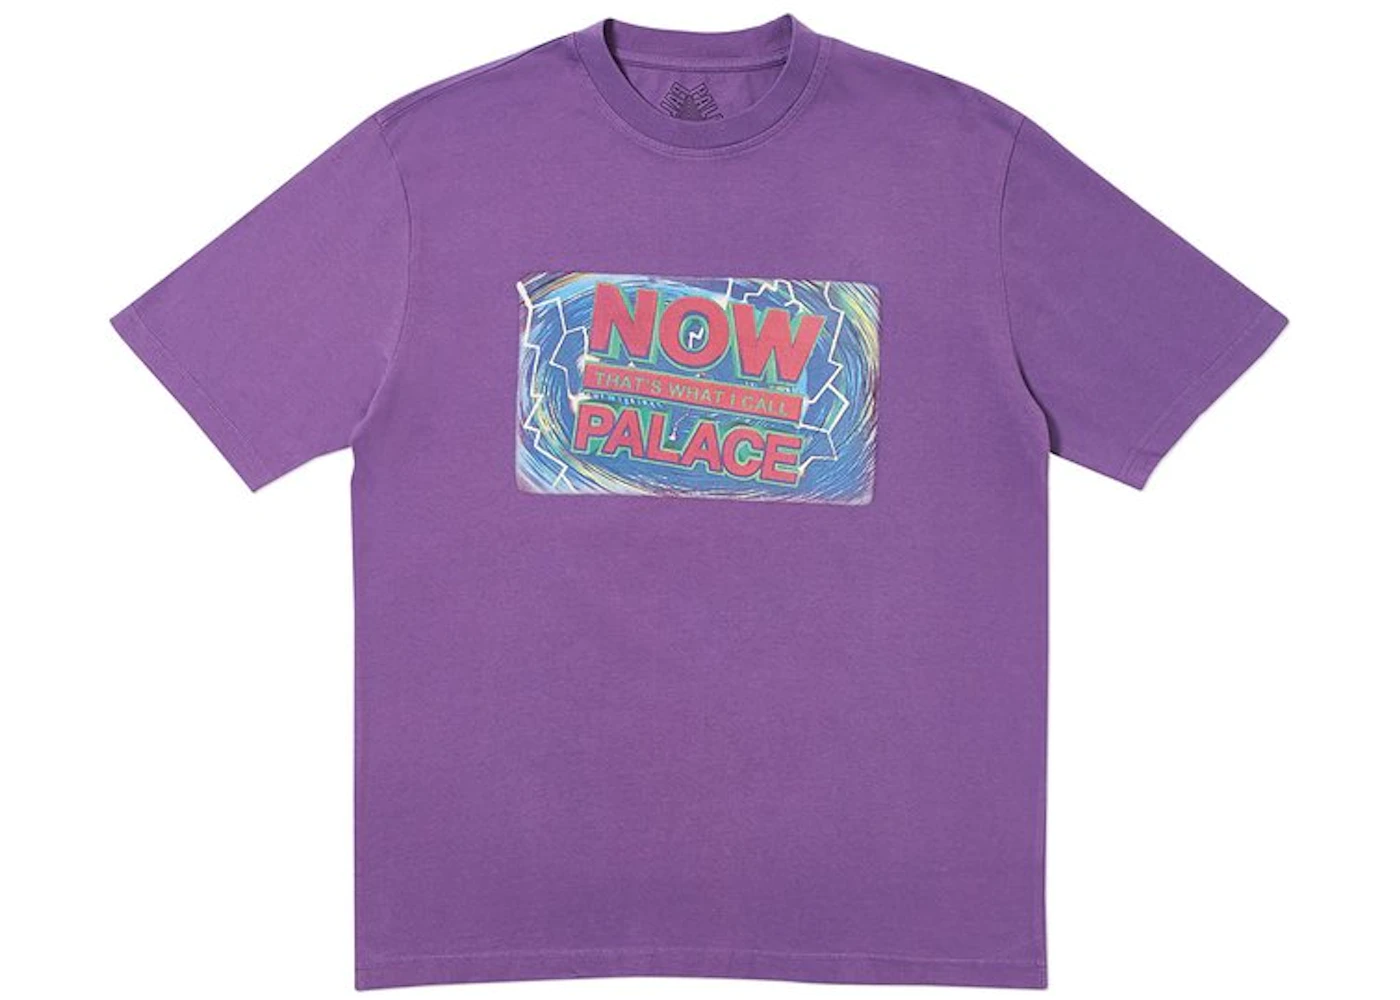 Palace Now That's What I Call Palace T-Shirt Purple - FW18 - US